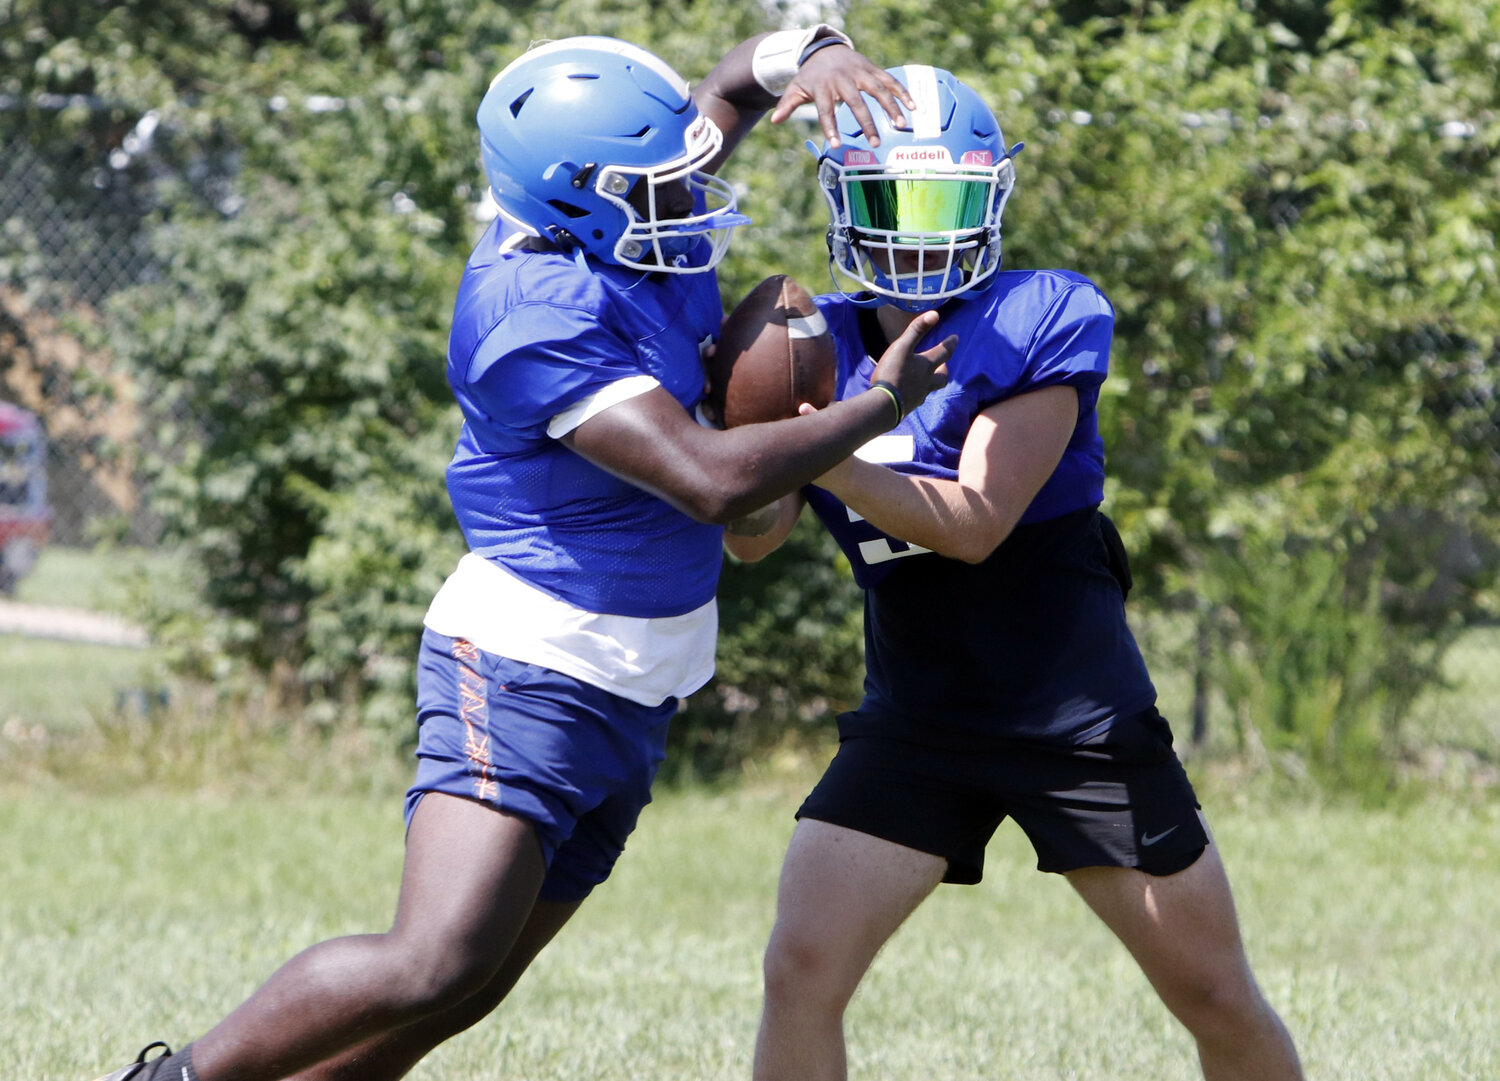 Wright City quarterback Joey Gendron (right) hands the ball off to Carleon Jones during a practice earlier this month.